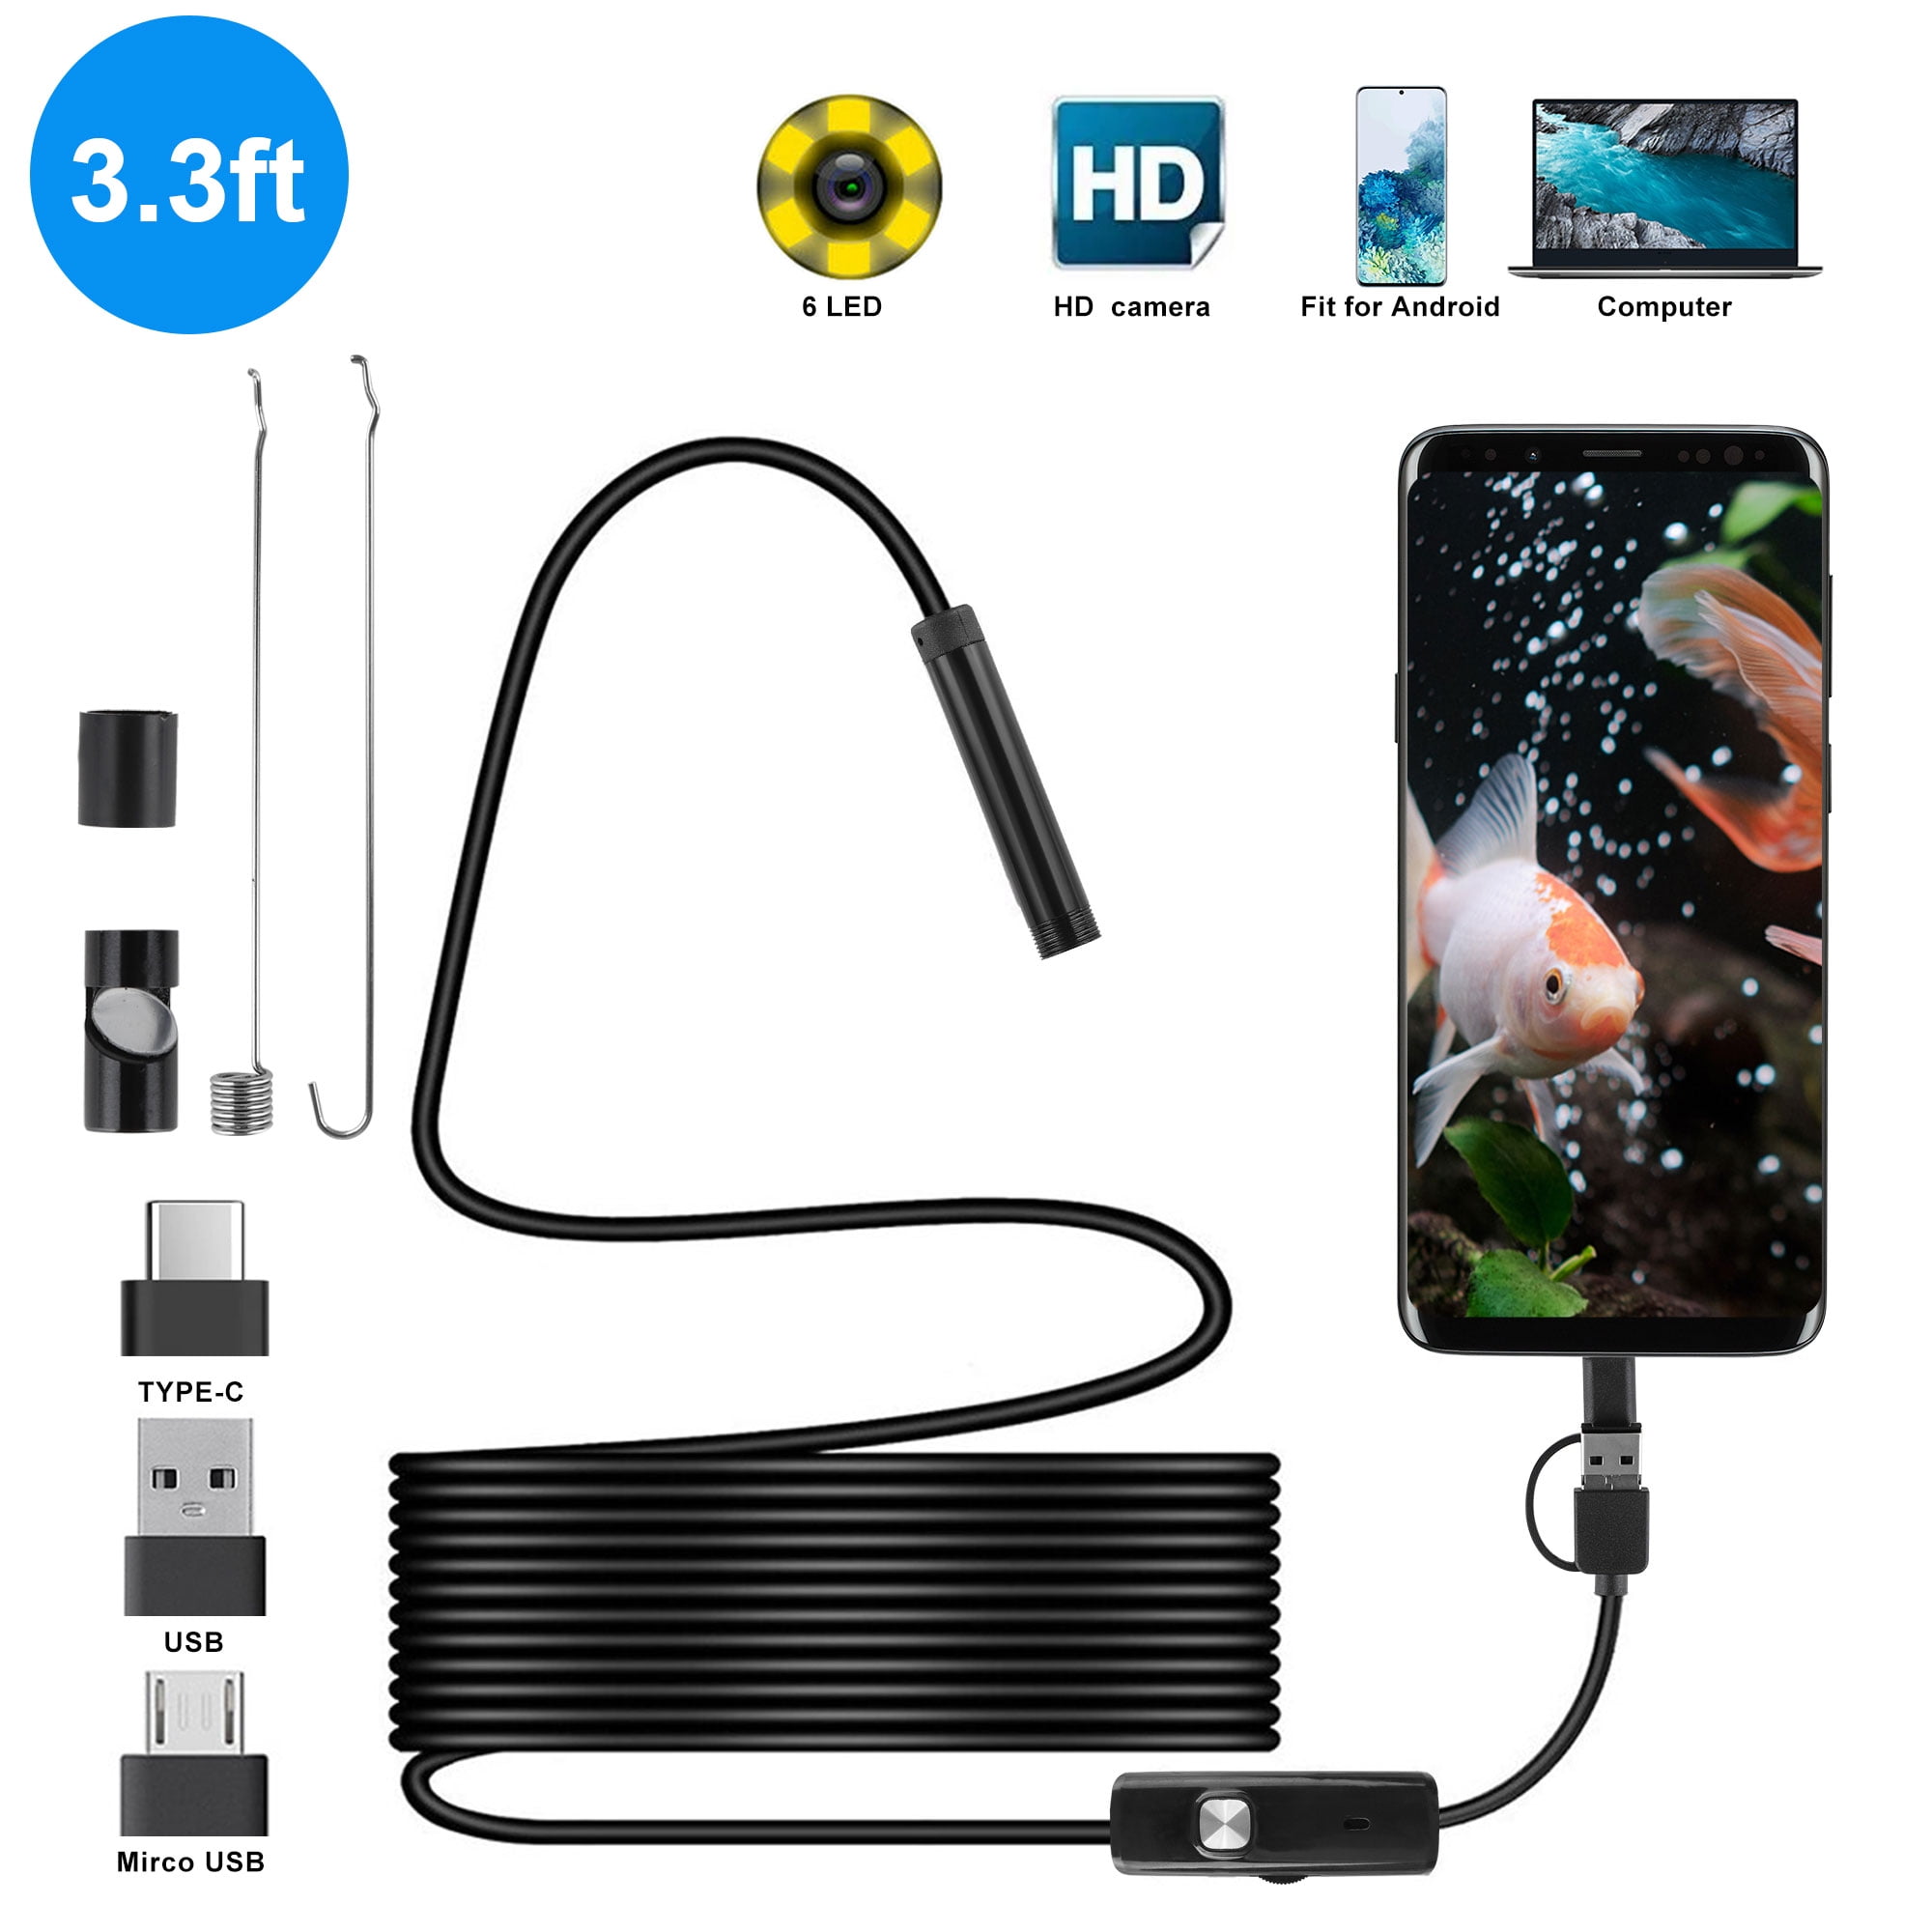 1pc Long Cord Mini Camera, Endoscope Camera, Flexible Waterproof Micro Usb  Inspection Borescope Camera For Android Pc Notebook Leds Adjustab, Endoscope  Mini Camera, Microusb Type-c Android Smartphone, Shop The Latest Trends